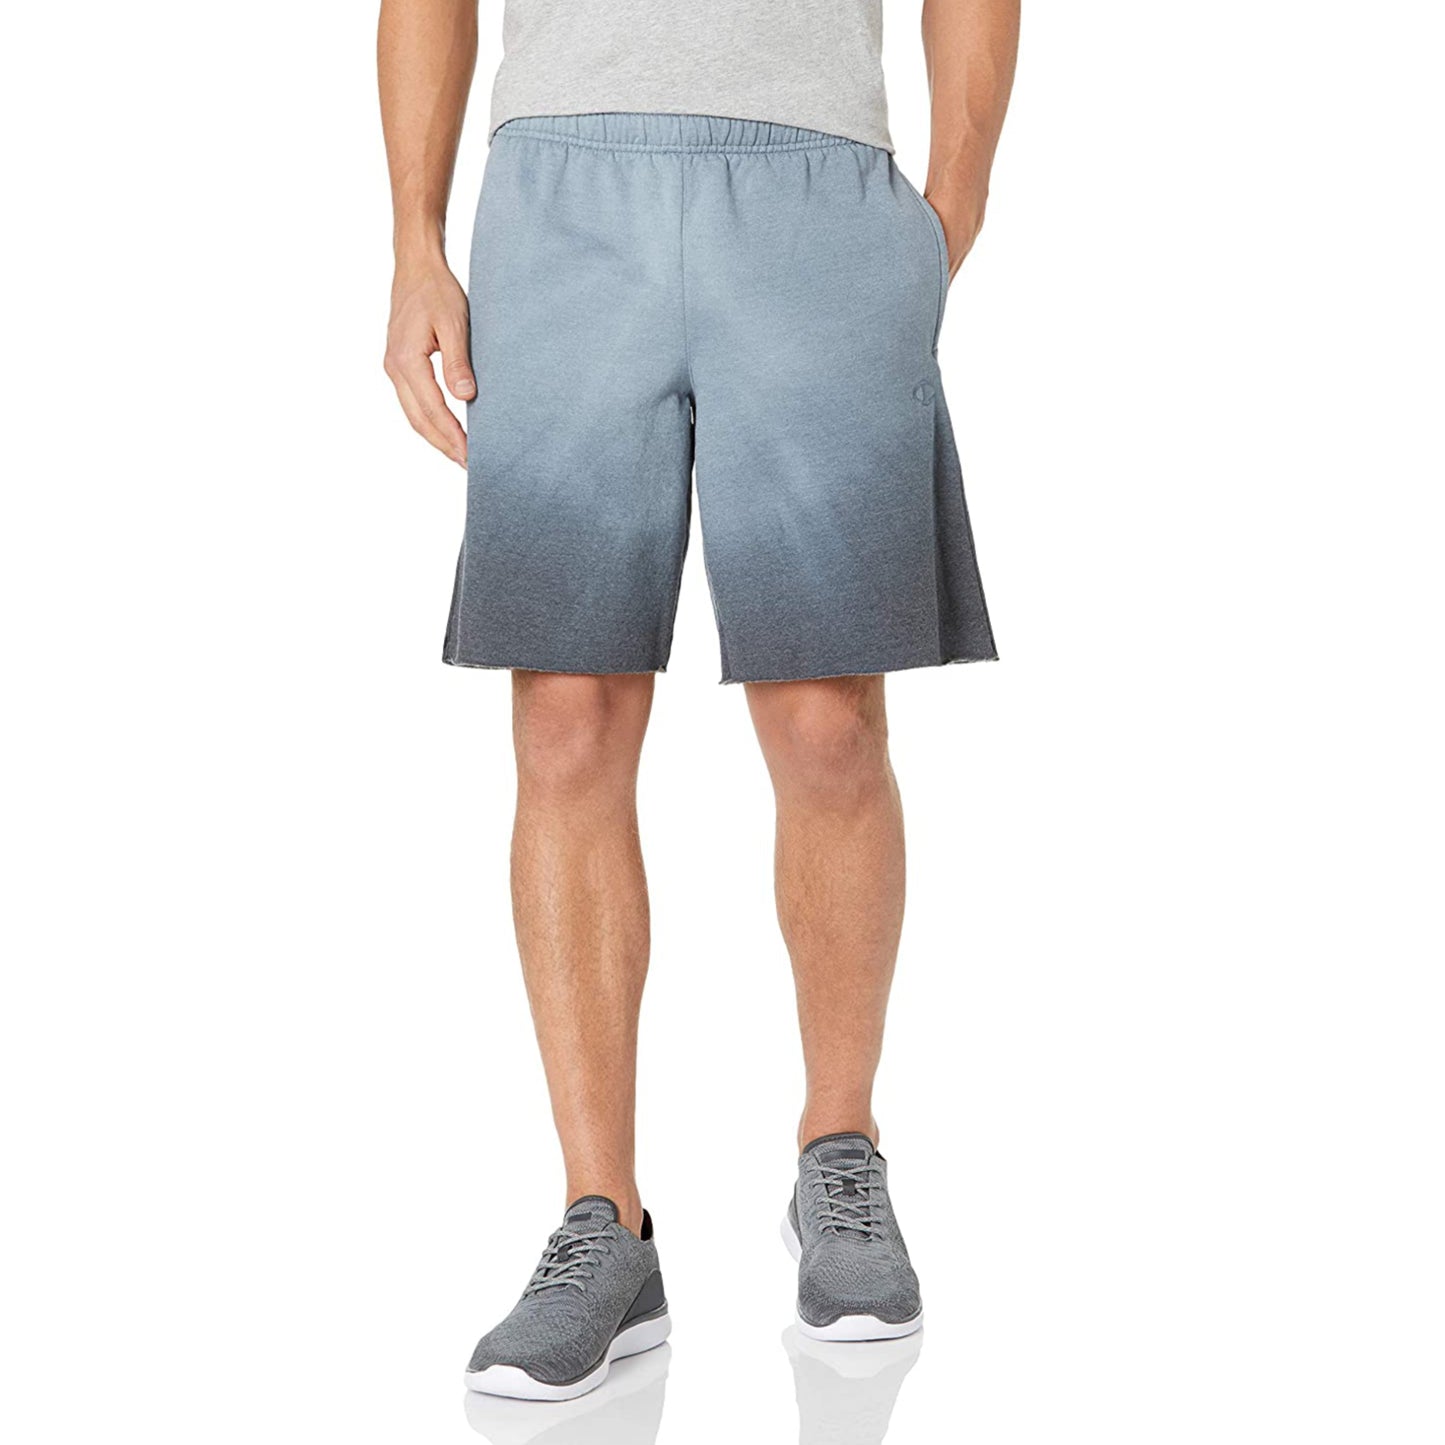 Champion Men's Moisture Wicking Ombre Powerblend Graphic Cotton Active Shorts